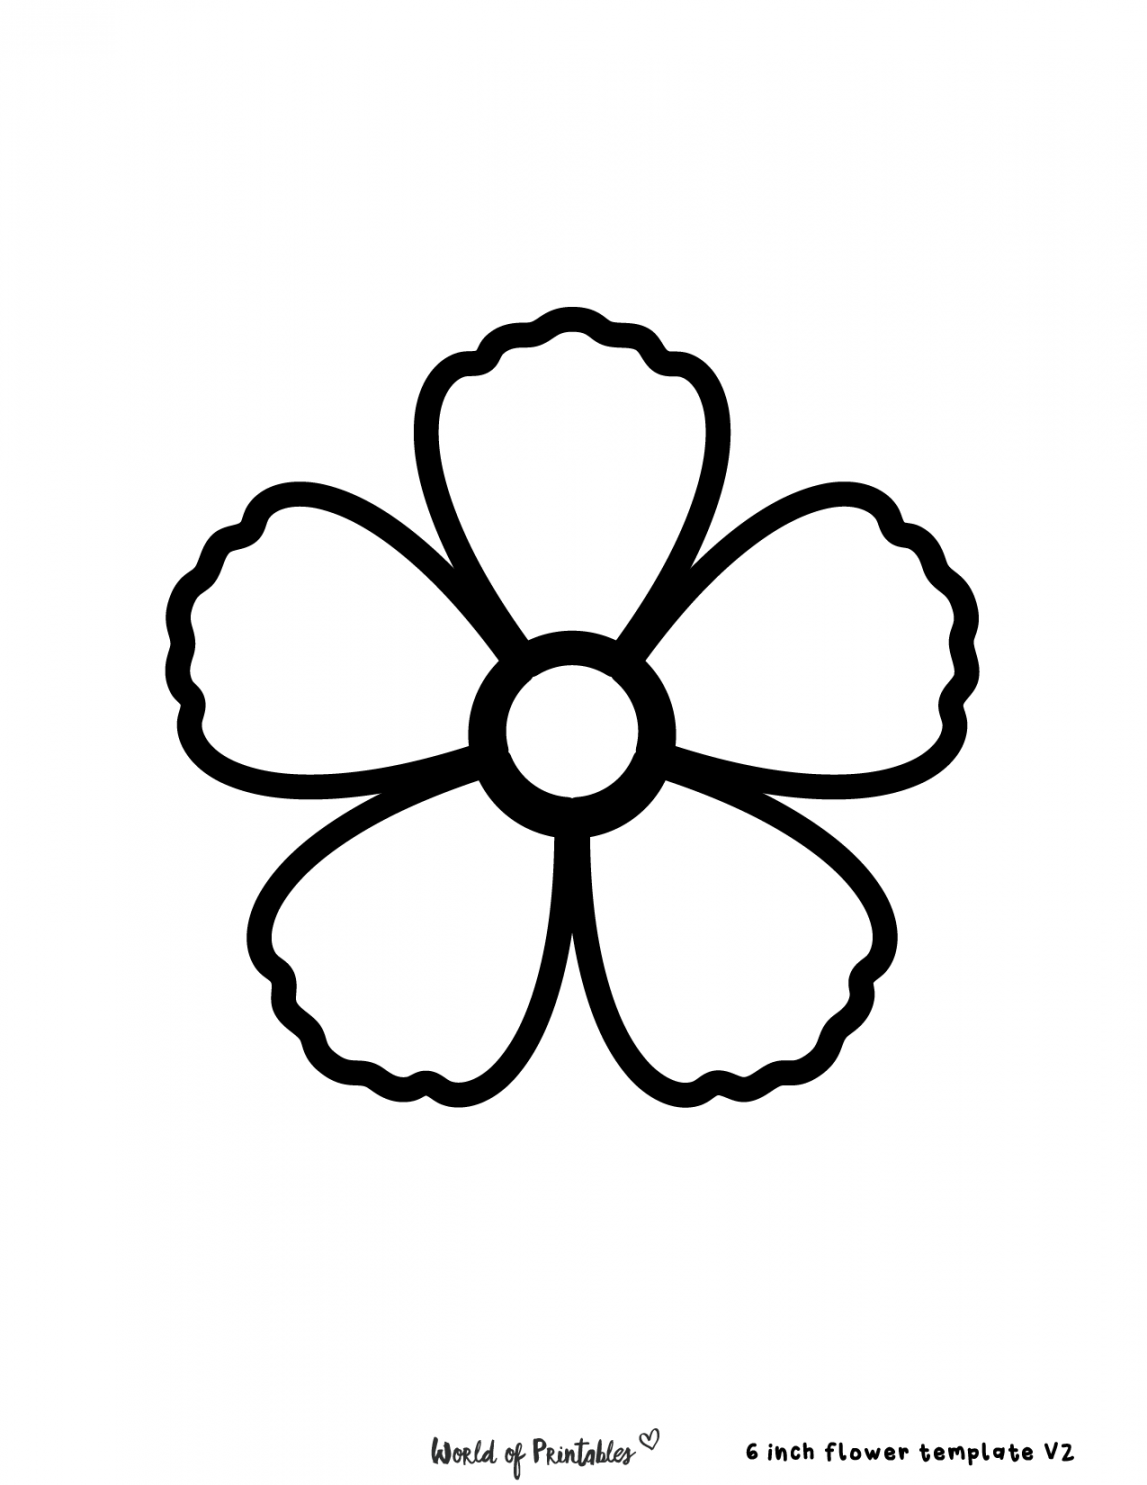 Best Free Flower Templates - World of Printables - FREE Printables - 5 Petal Flower Template Free Printable